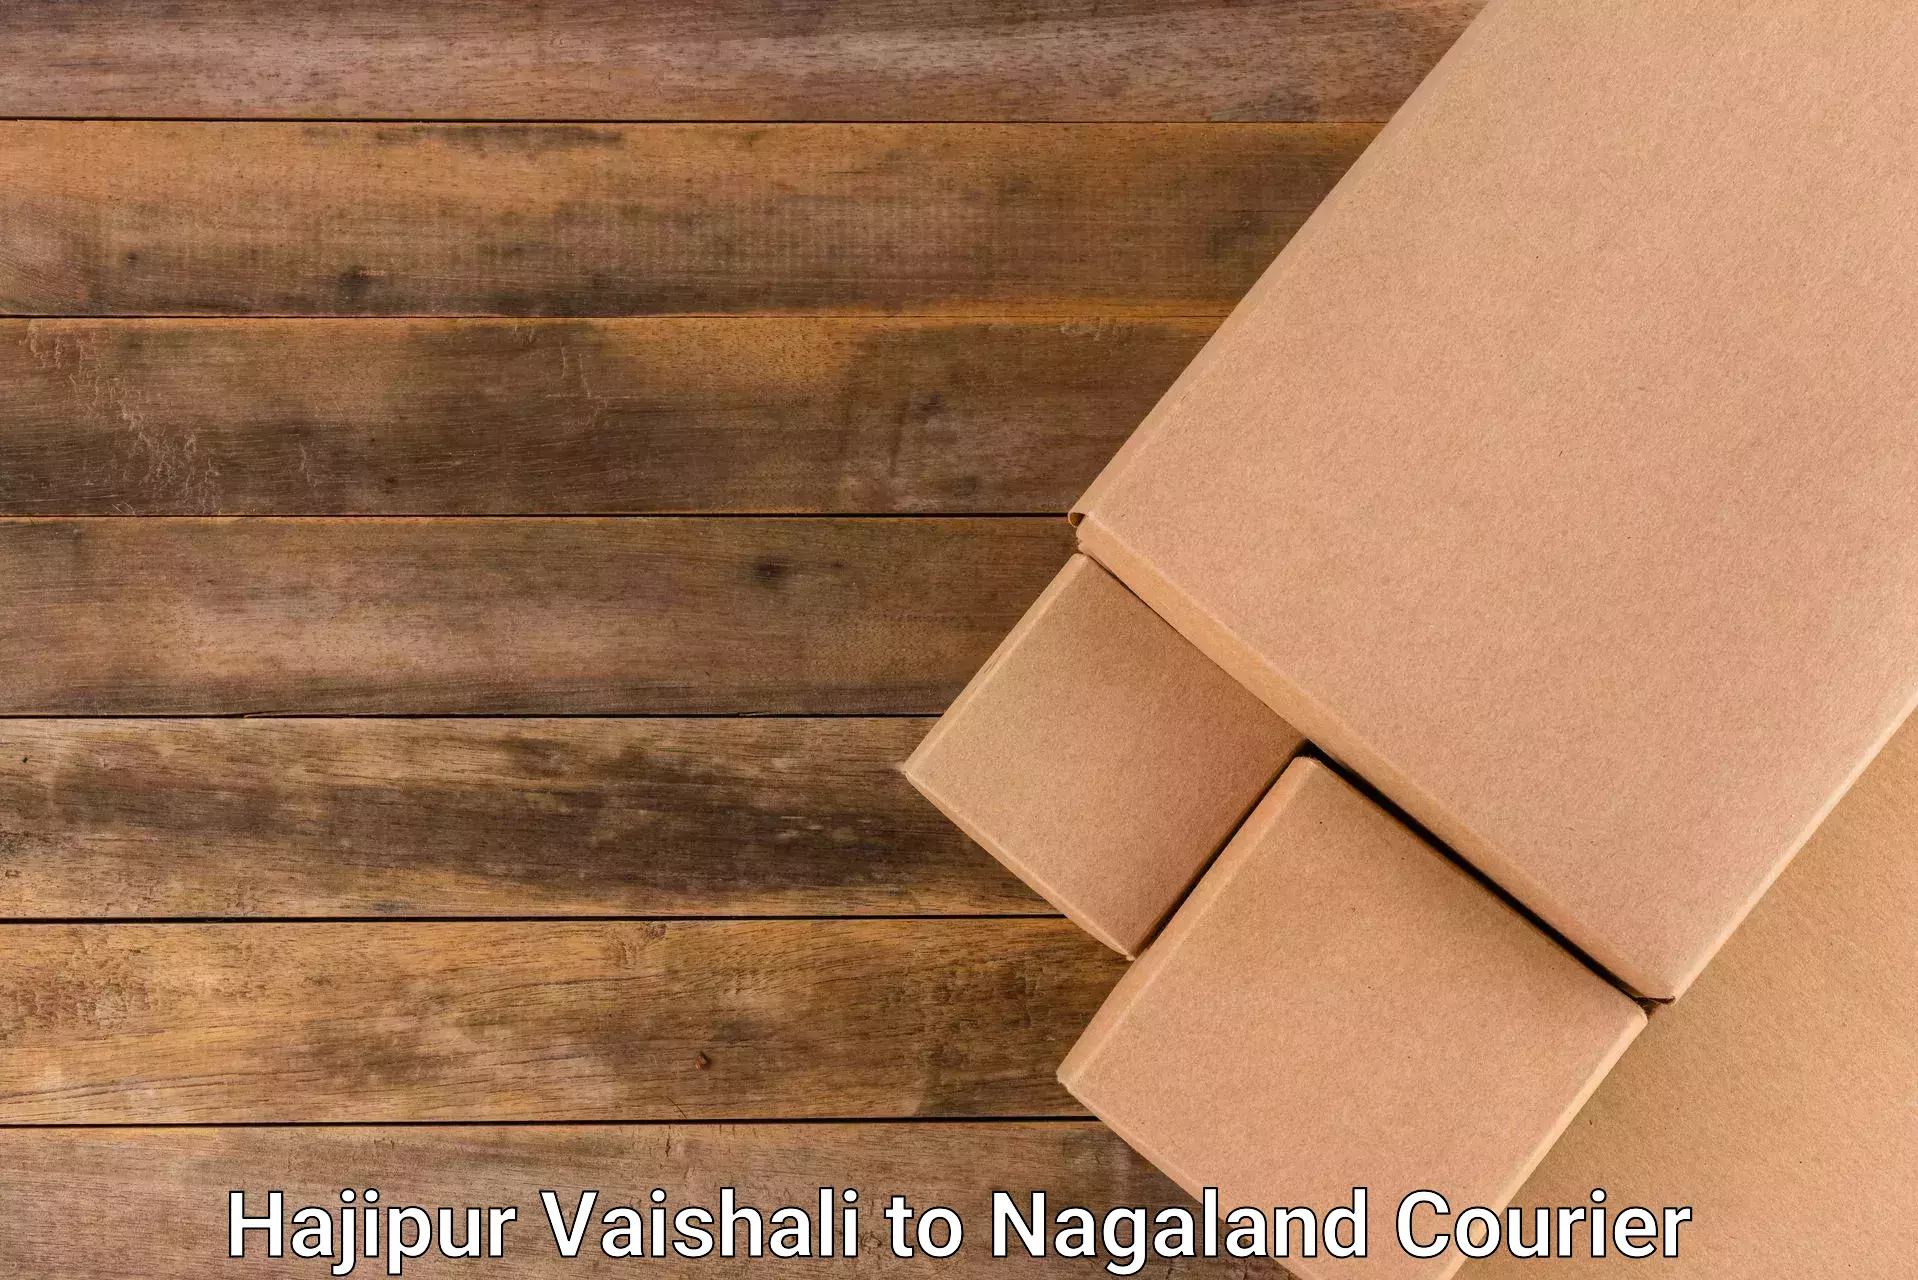 Business courier solutions Hajipur Vaishali to Mon